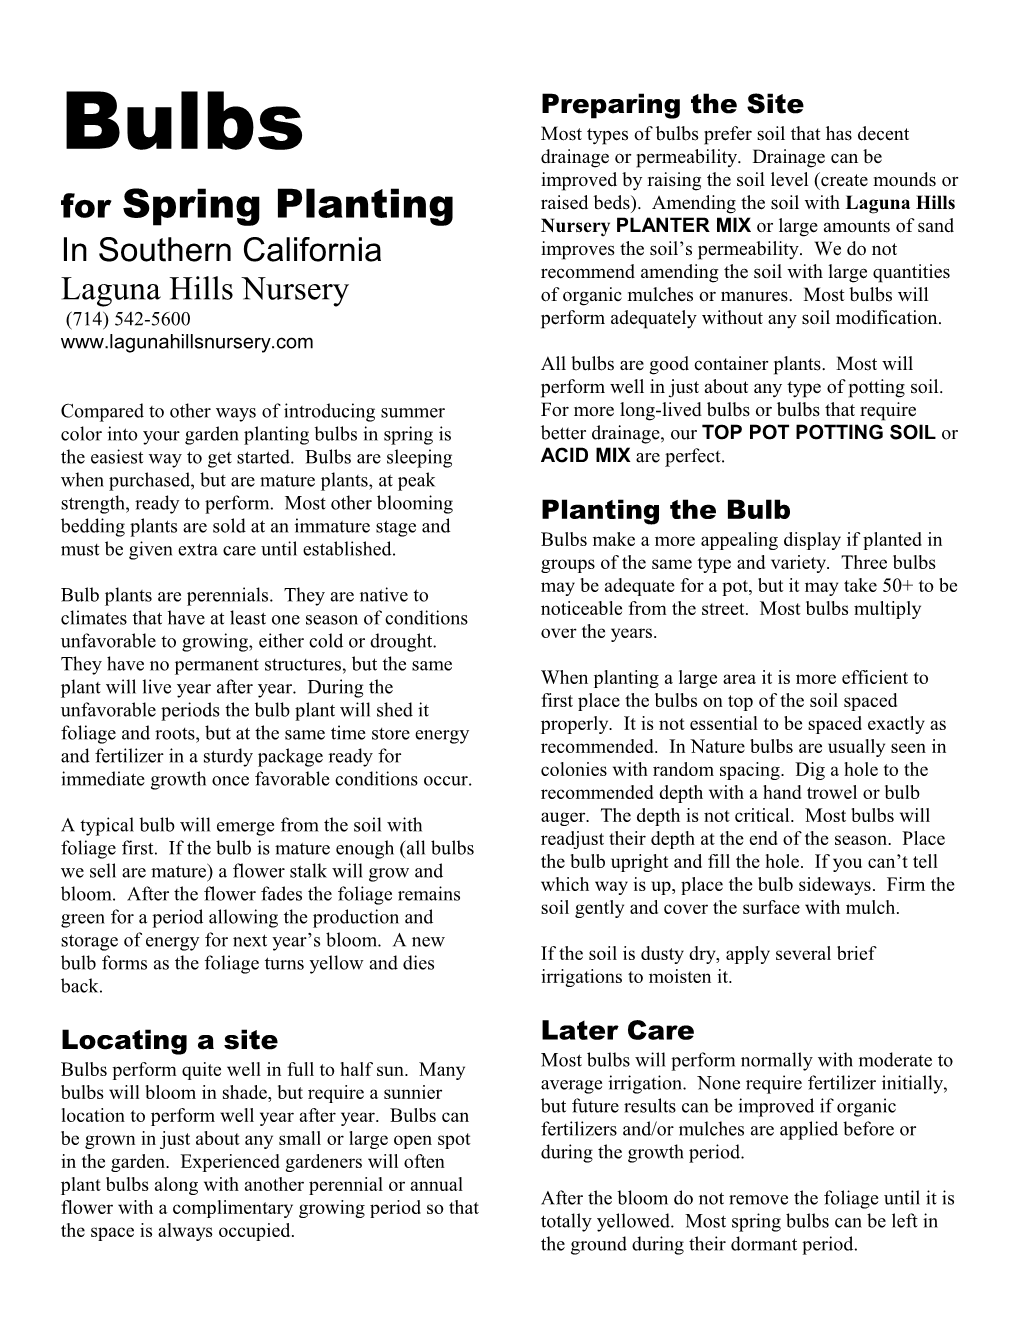 For Spring Planting